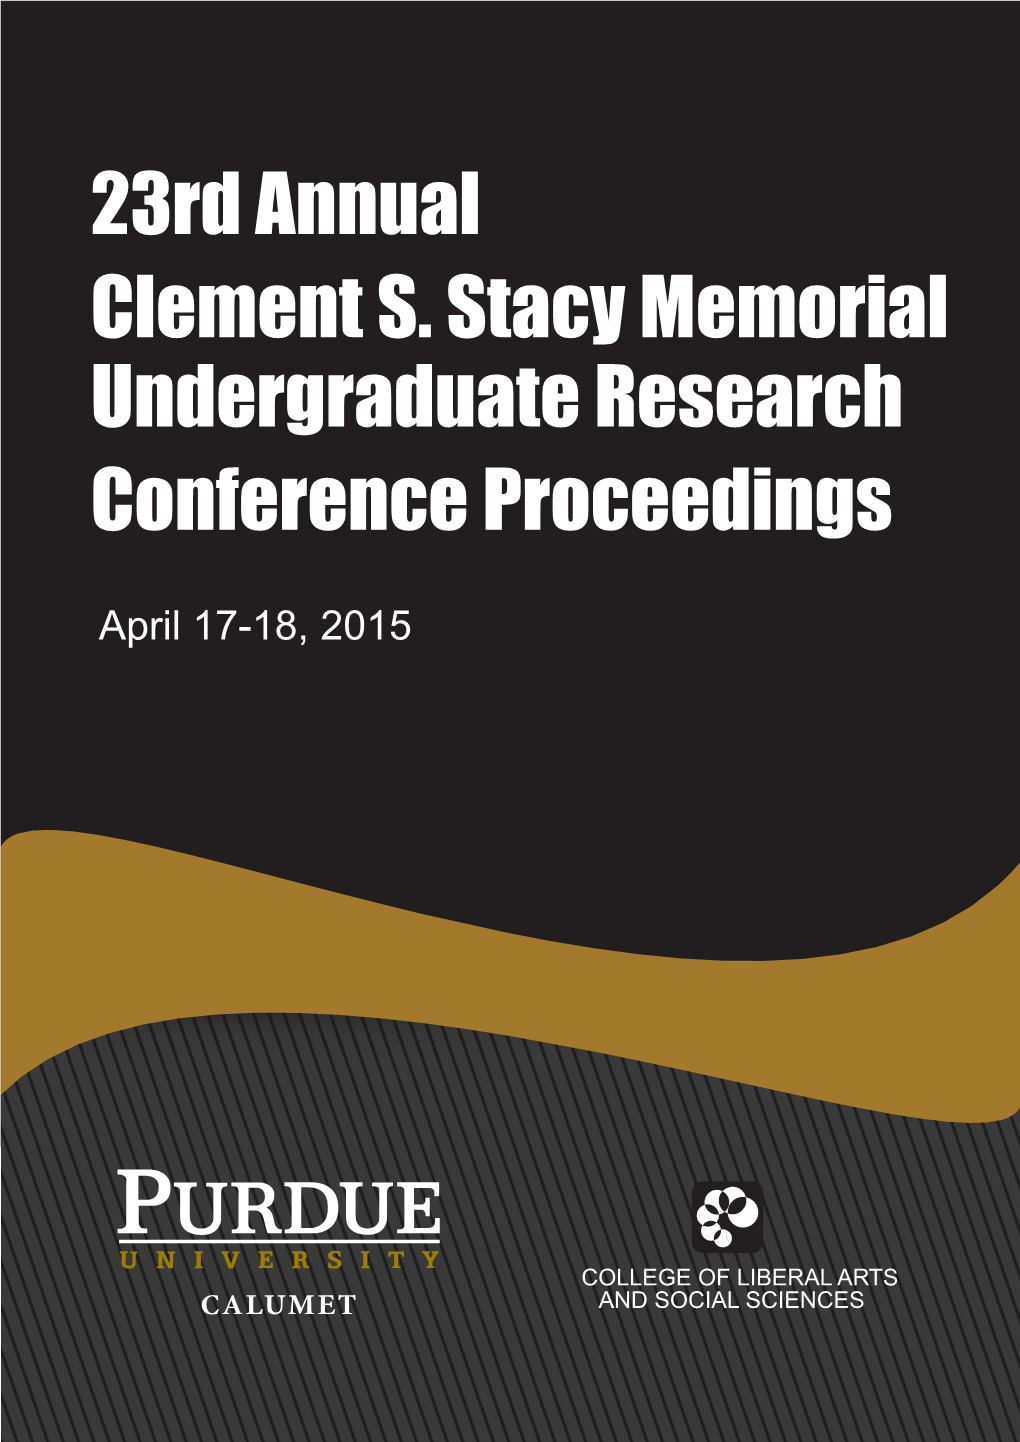 23Rd Annual Clement S. Stacy Memorial Undergraduate Research Conference Proceedings